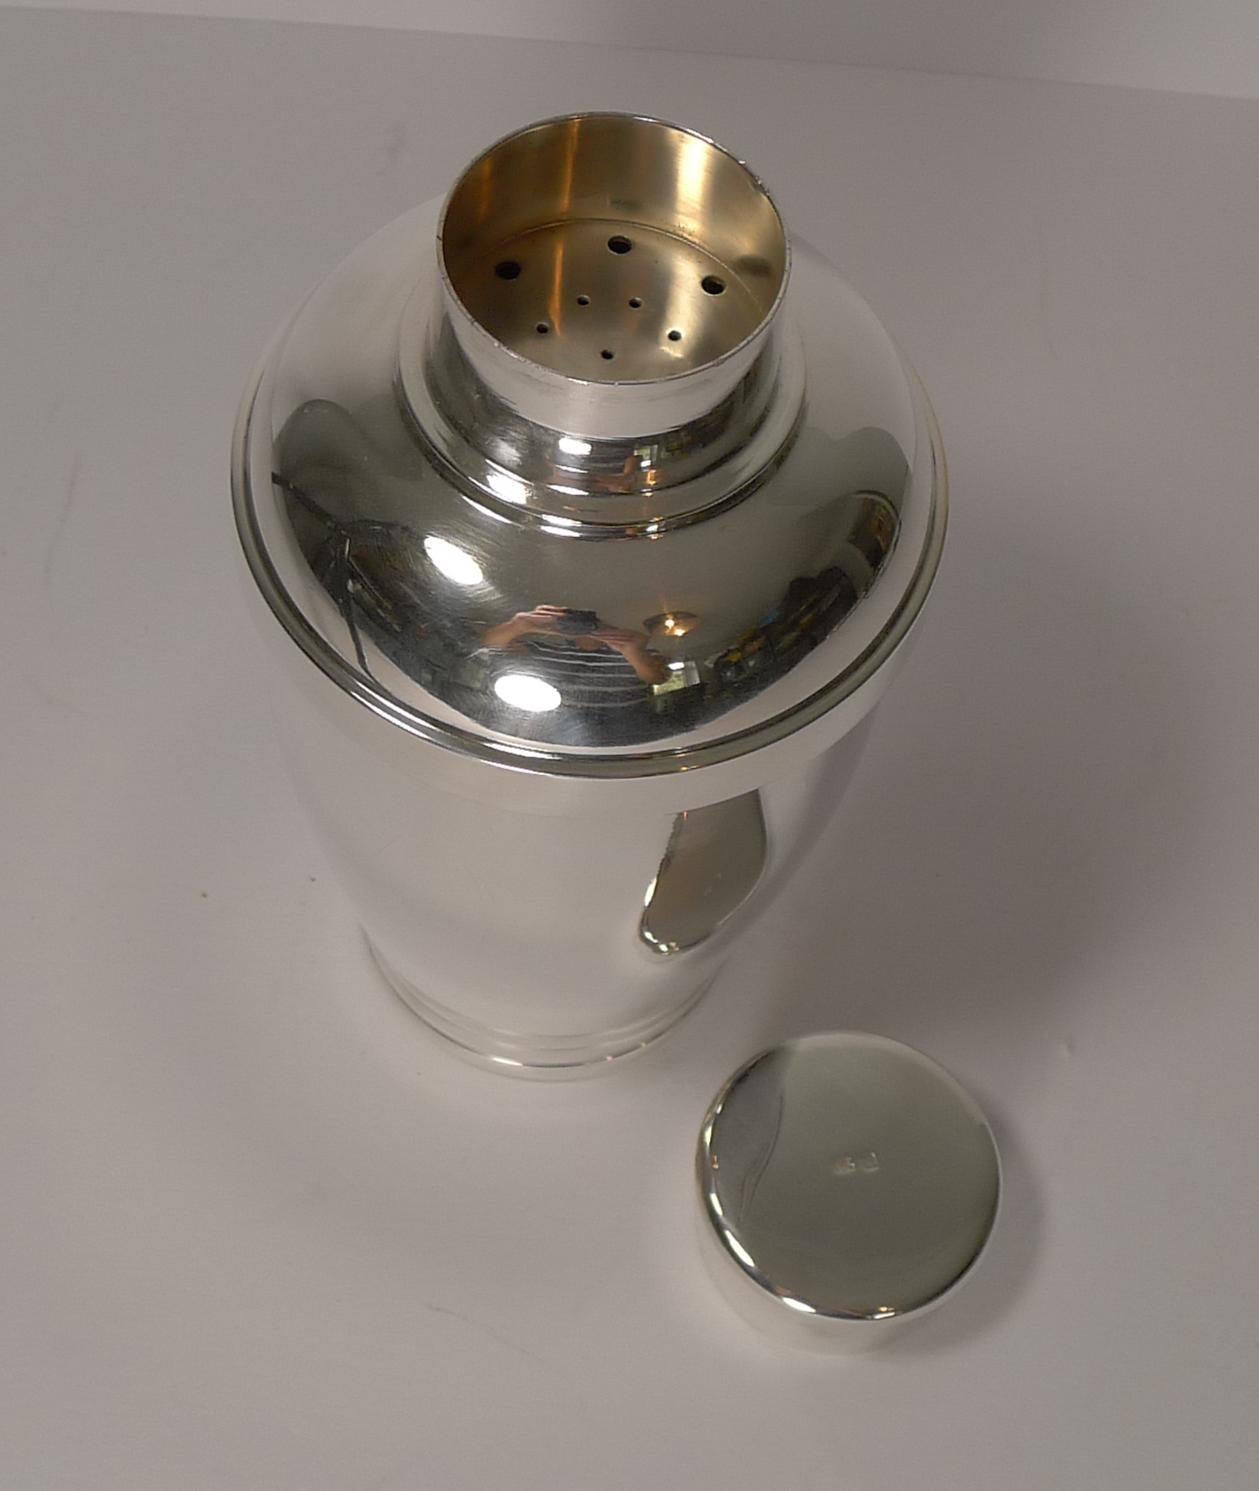 A fabulous quality French cocktail shaker, a hefty weight and solidly made. Just back from our silversmith, where it has been professionally refurbished to it's former glory.

An unusual chunky shape with a clear Art Deco design. The lid is where